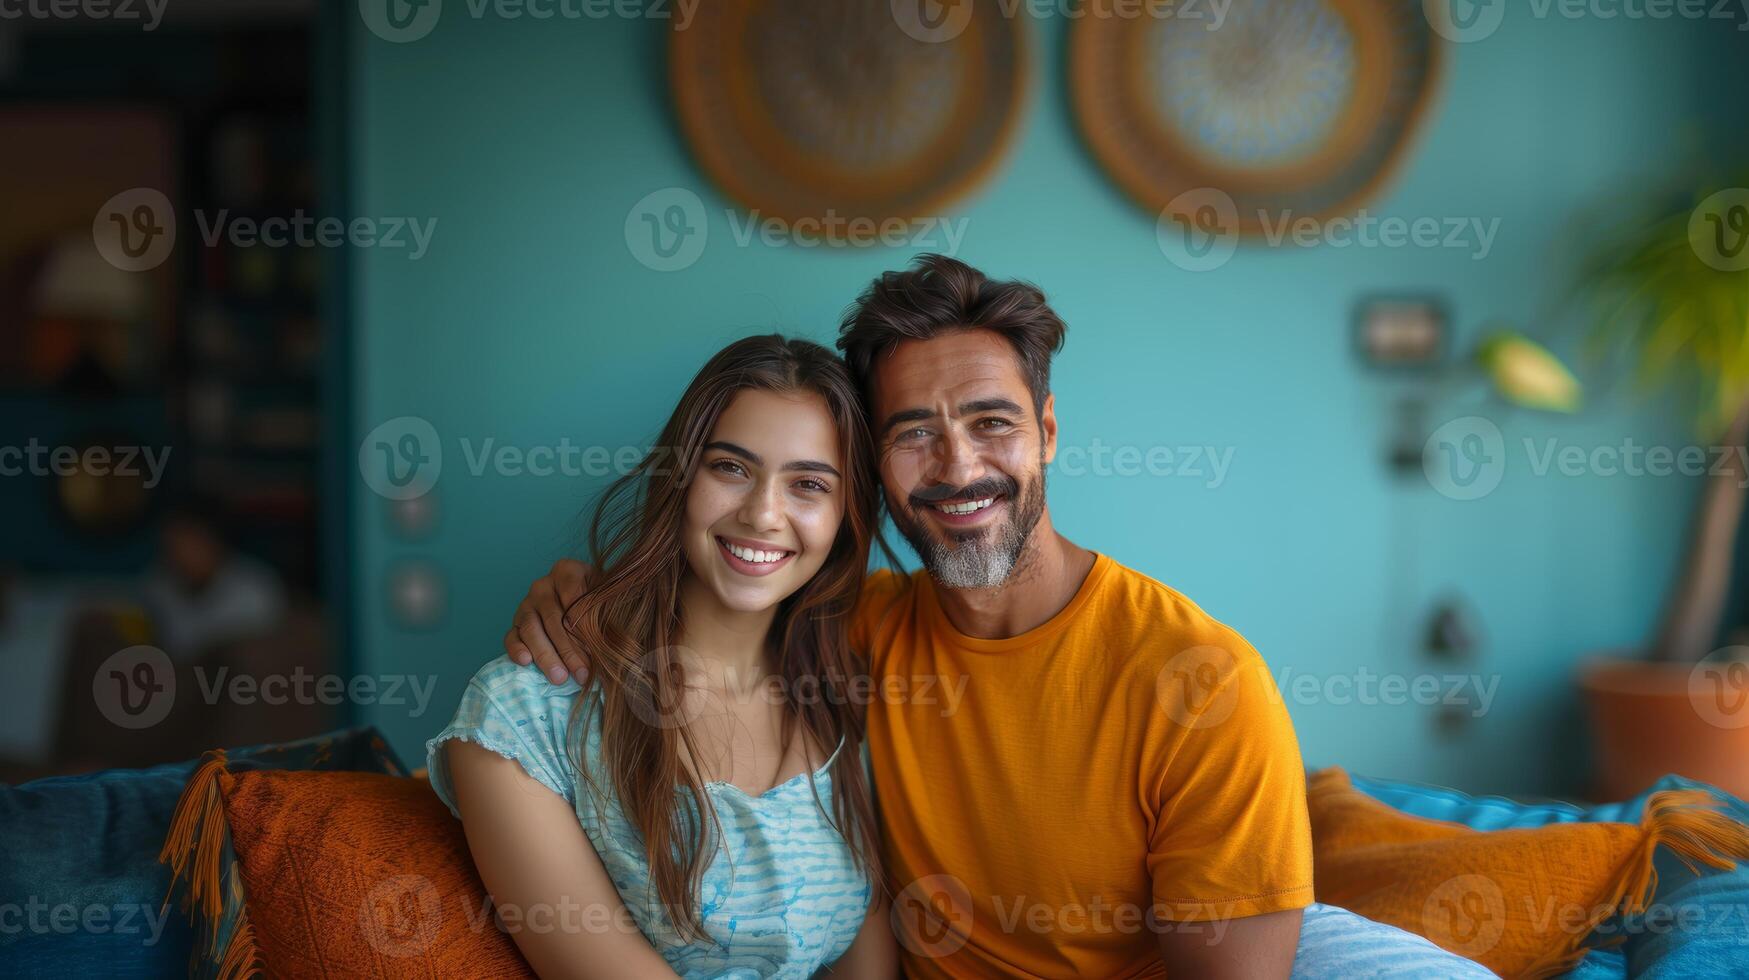 Handsome Young Man and Beautiful Indian Woman Smiling Together on a Cozy Couch photo